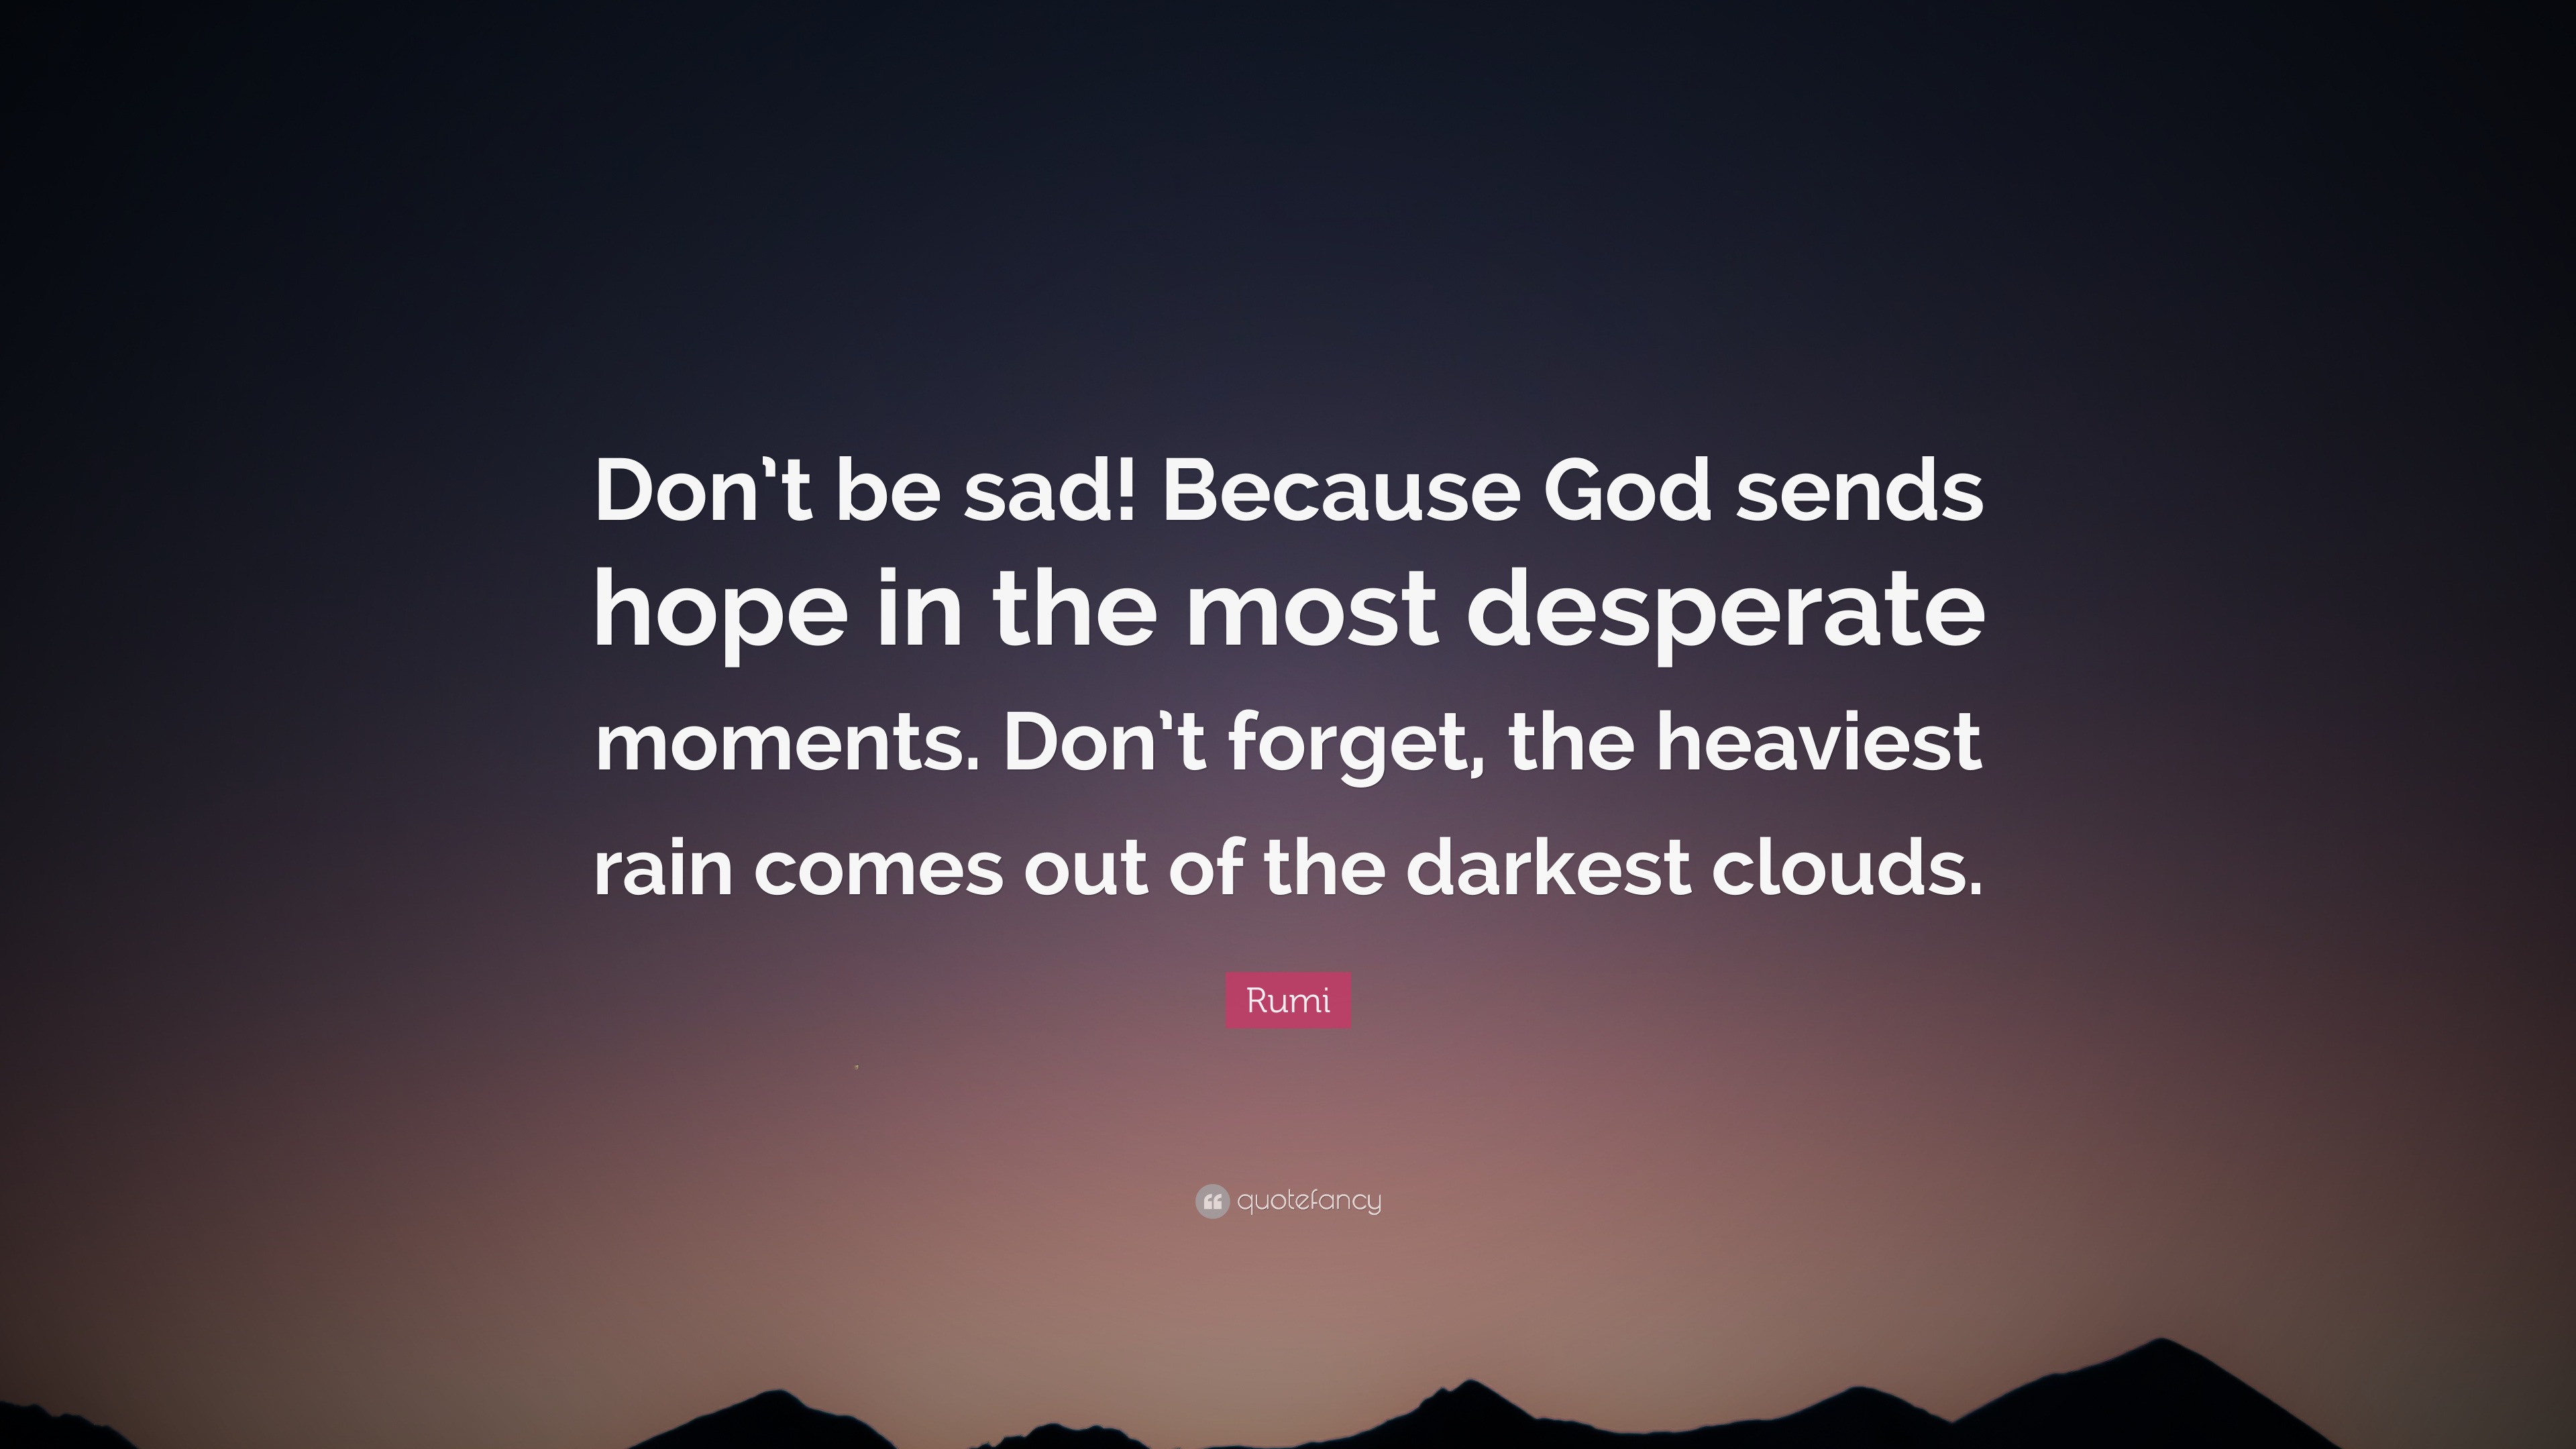 Rumi Quote “Don t be sad Because God sends hope in the